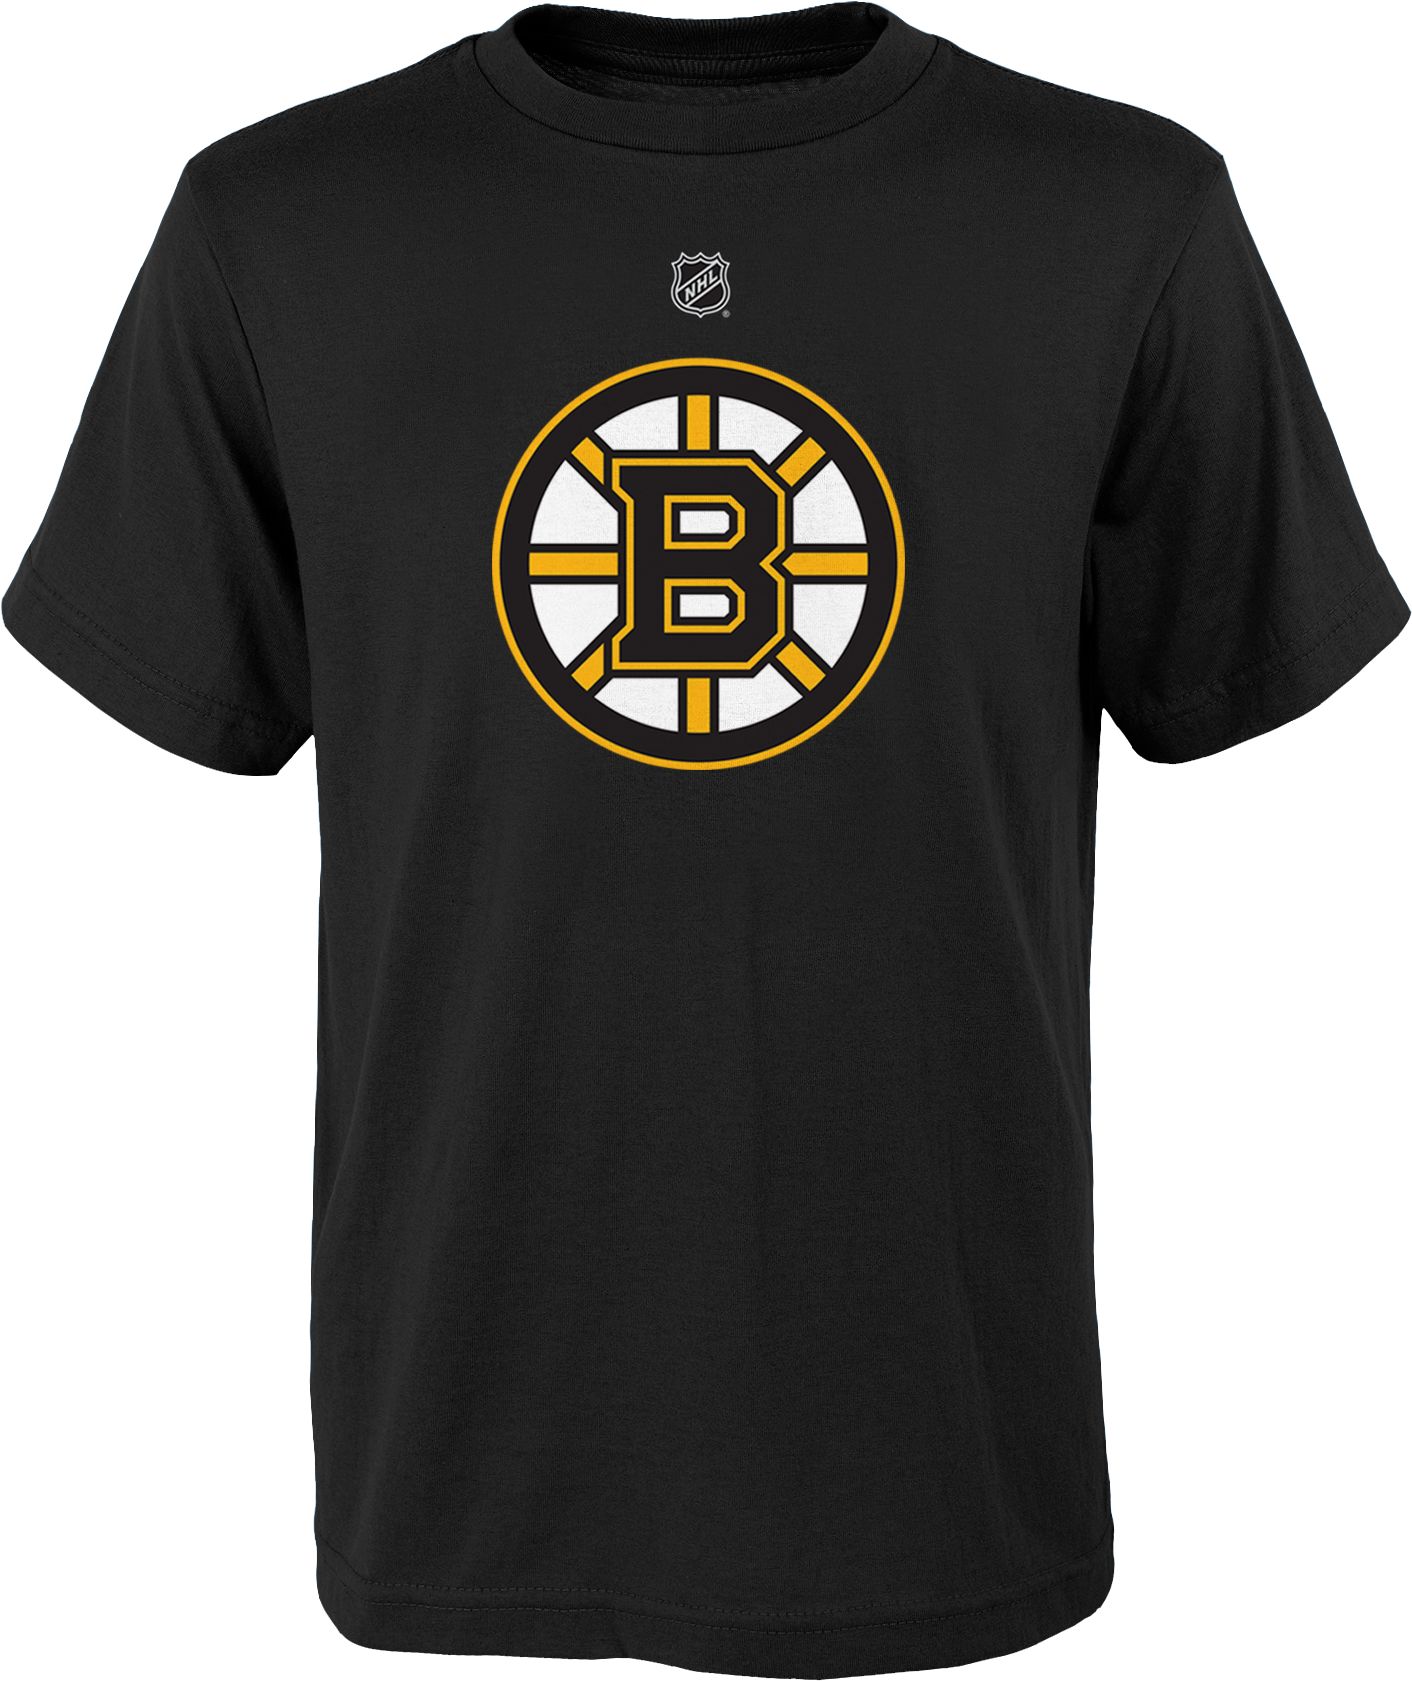 OUTER STUFF, JR NHL PRIME SS COTTON TEE